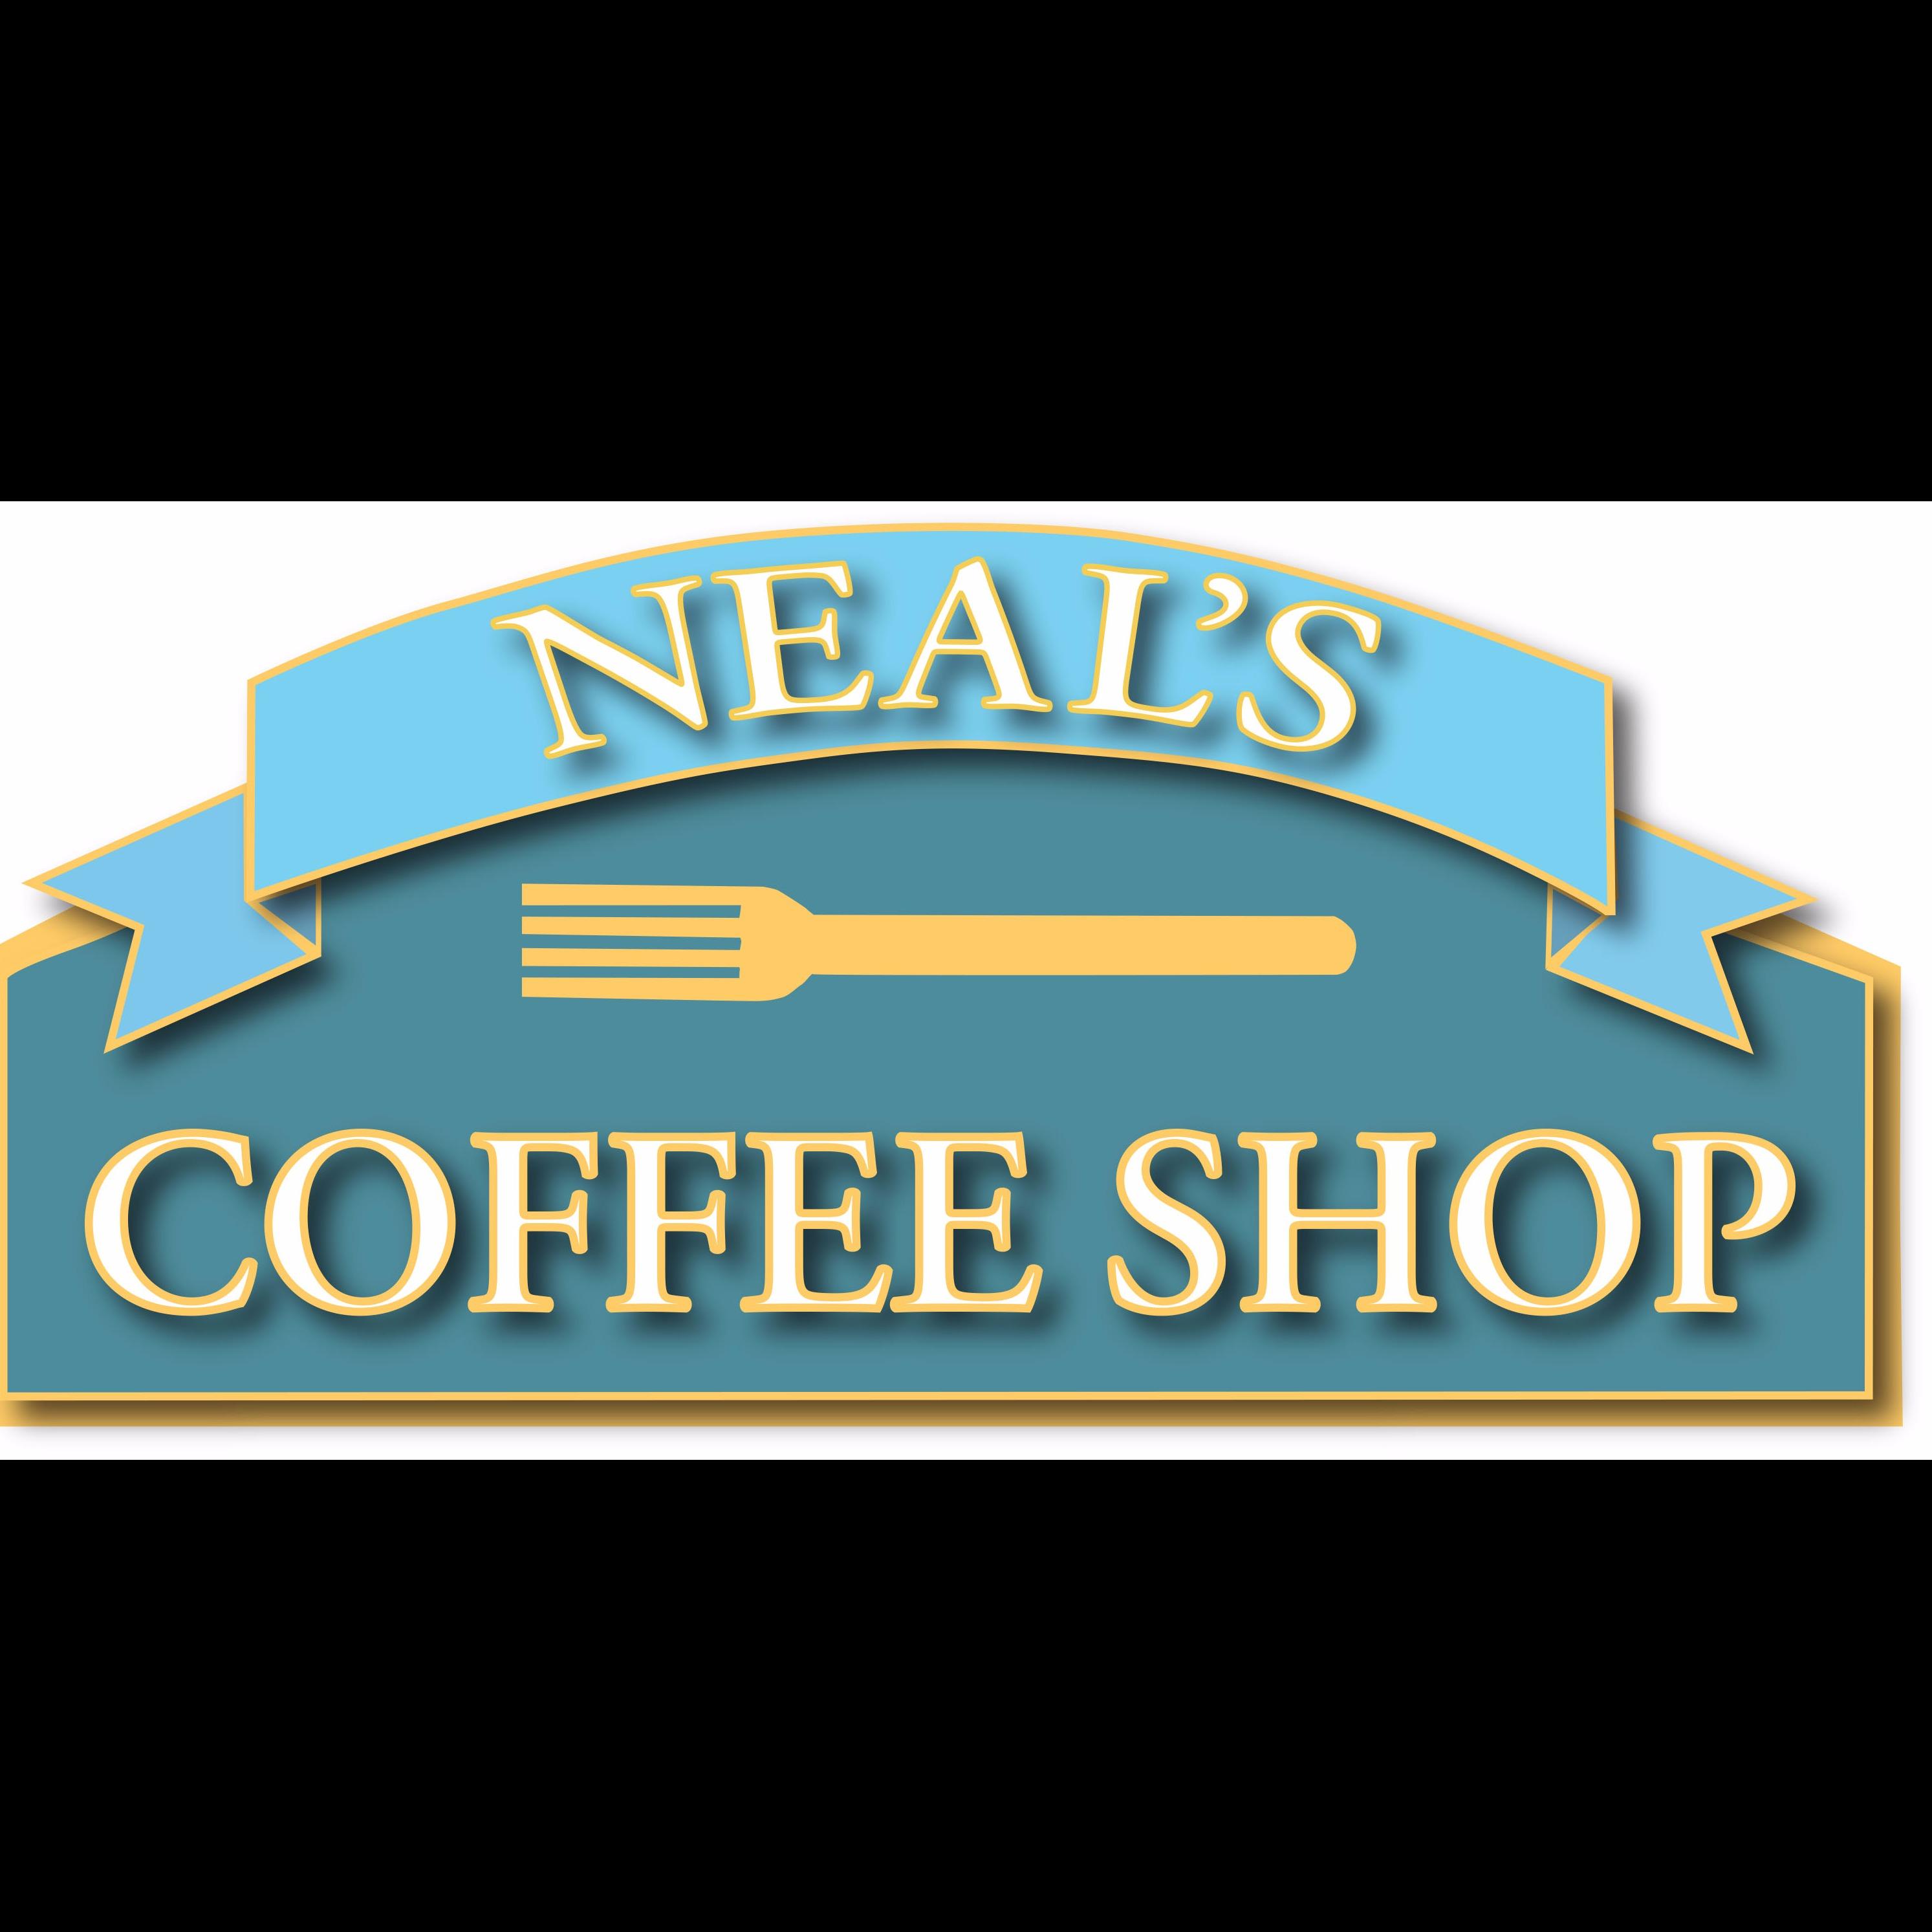 Neal's Coffee Shop Coupons near me in Burlingame, CA 94010 | 8coupons